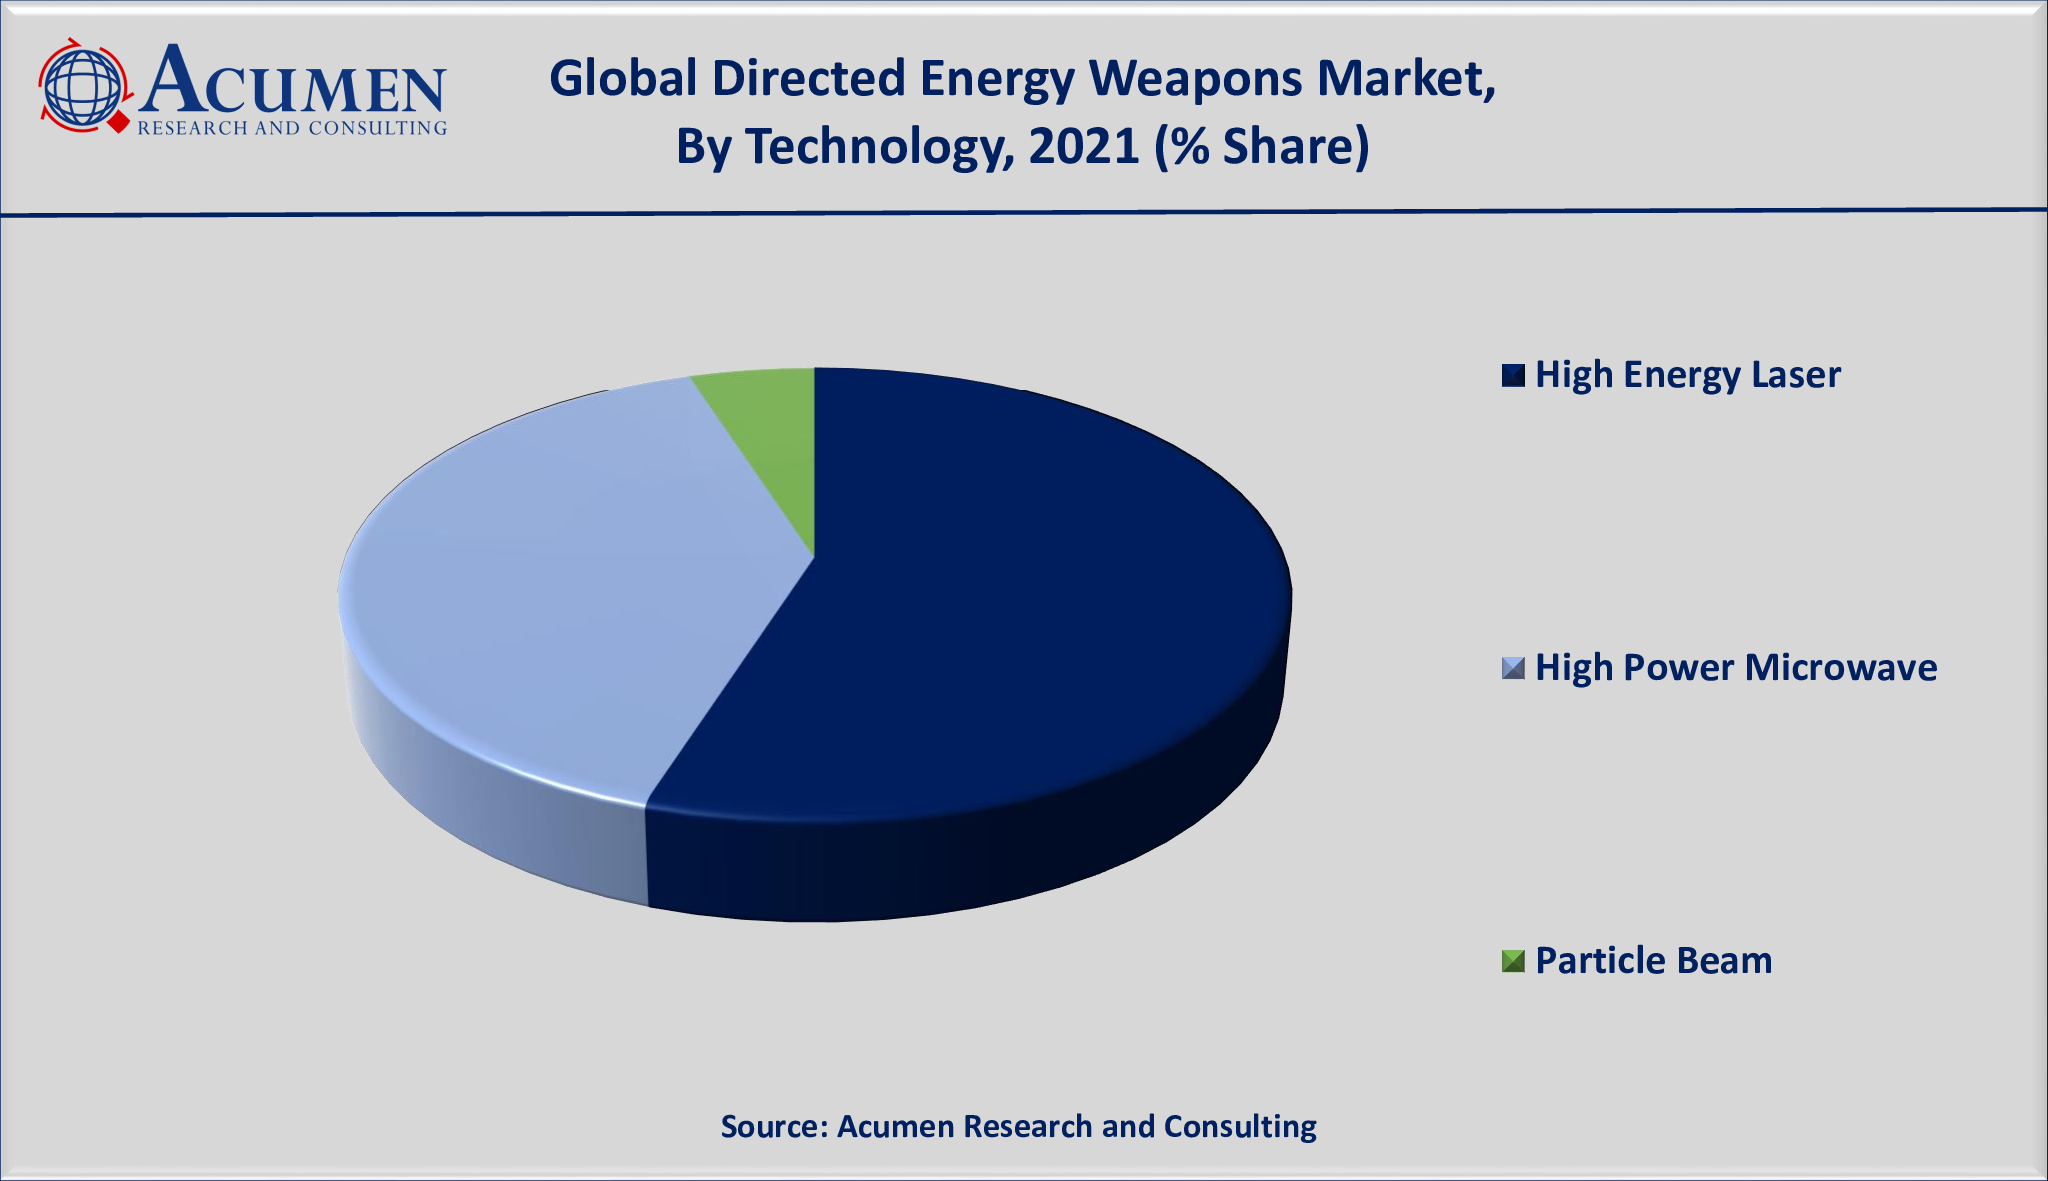 Directed Energy Weapons Market Analysis is valued at USD 5,352 Million in 2021 and is projected to reach a market size of USD 23,151 million by 2030; growing at a CAGR of 18.2%.